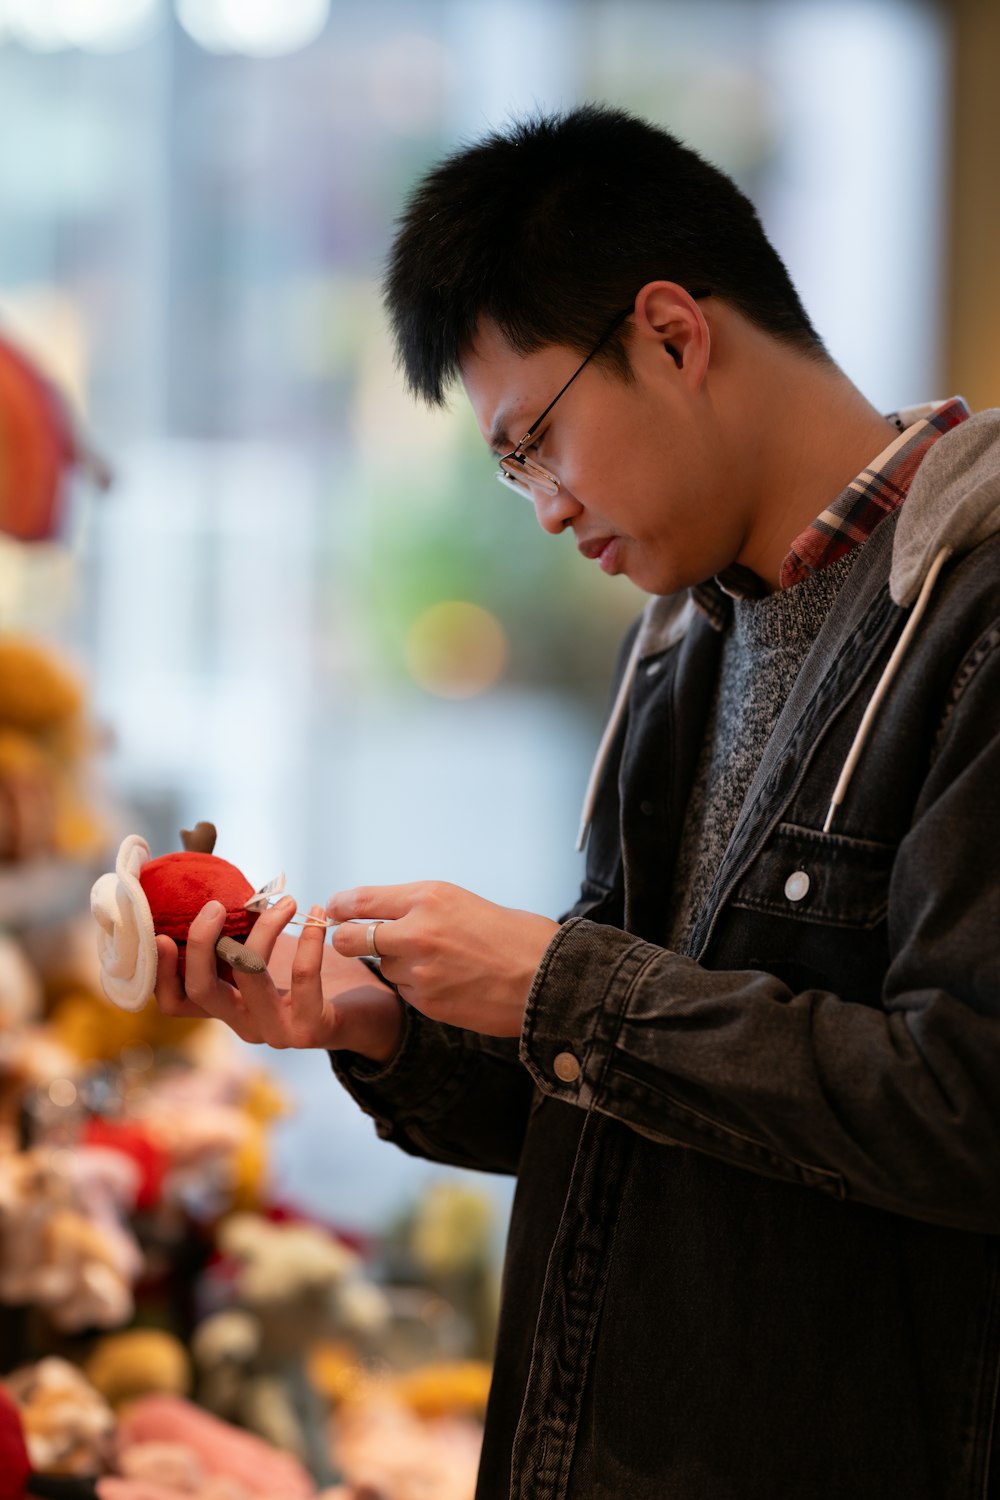 a man looking at an apple in a store